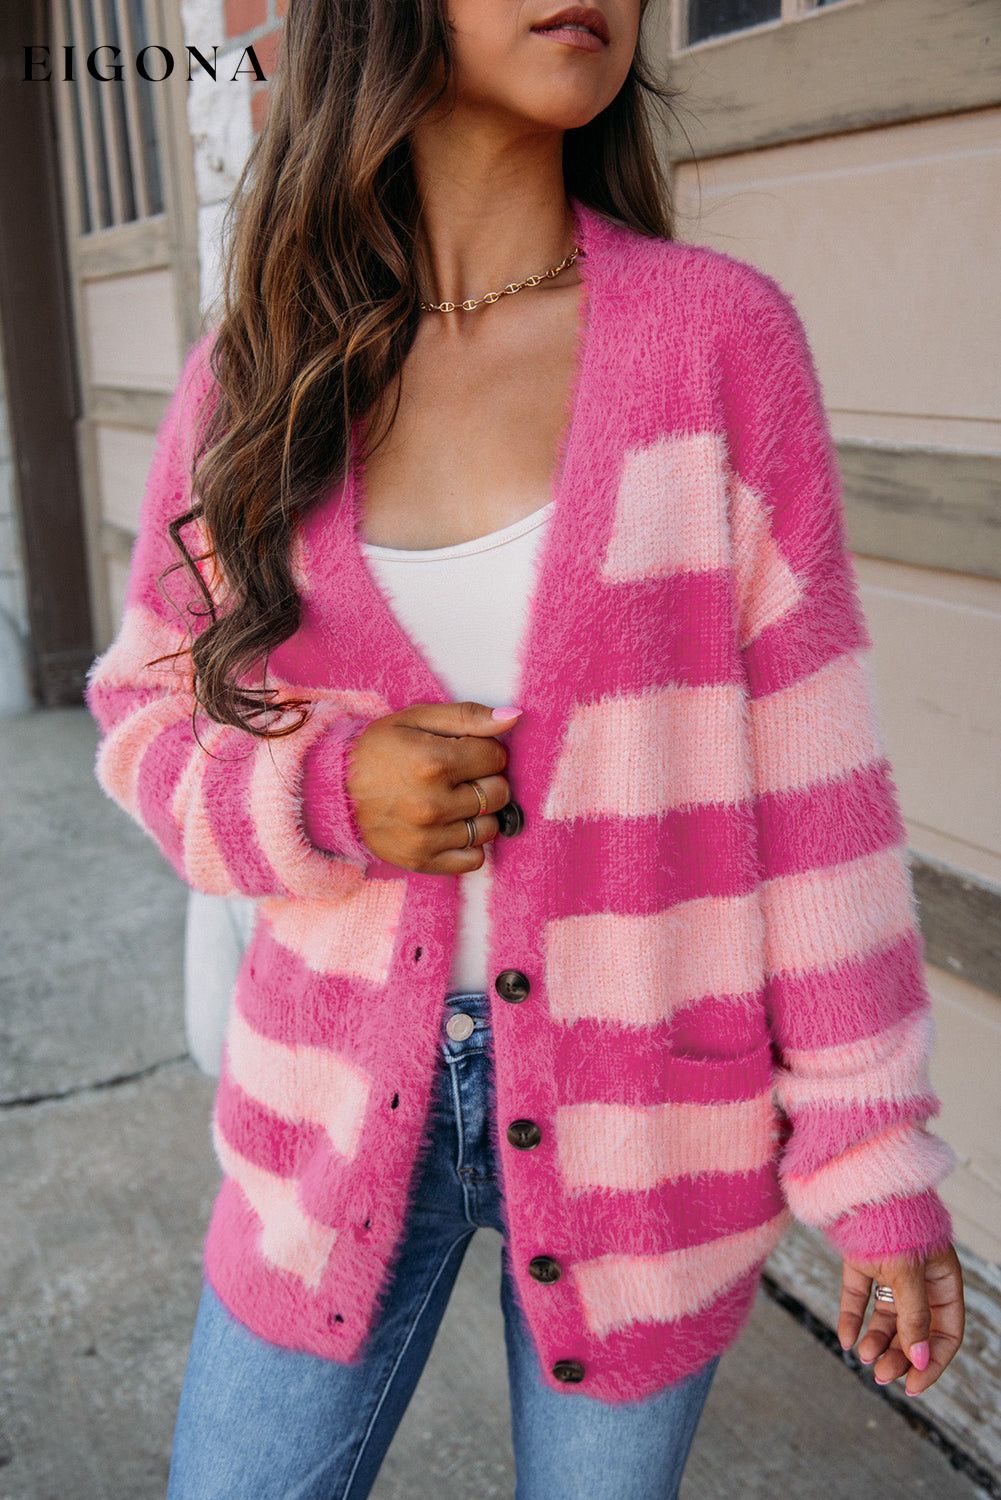 Strawberry Pink Colorblock Striped Buttoned Fuzzy Cardigan Sweater